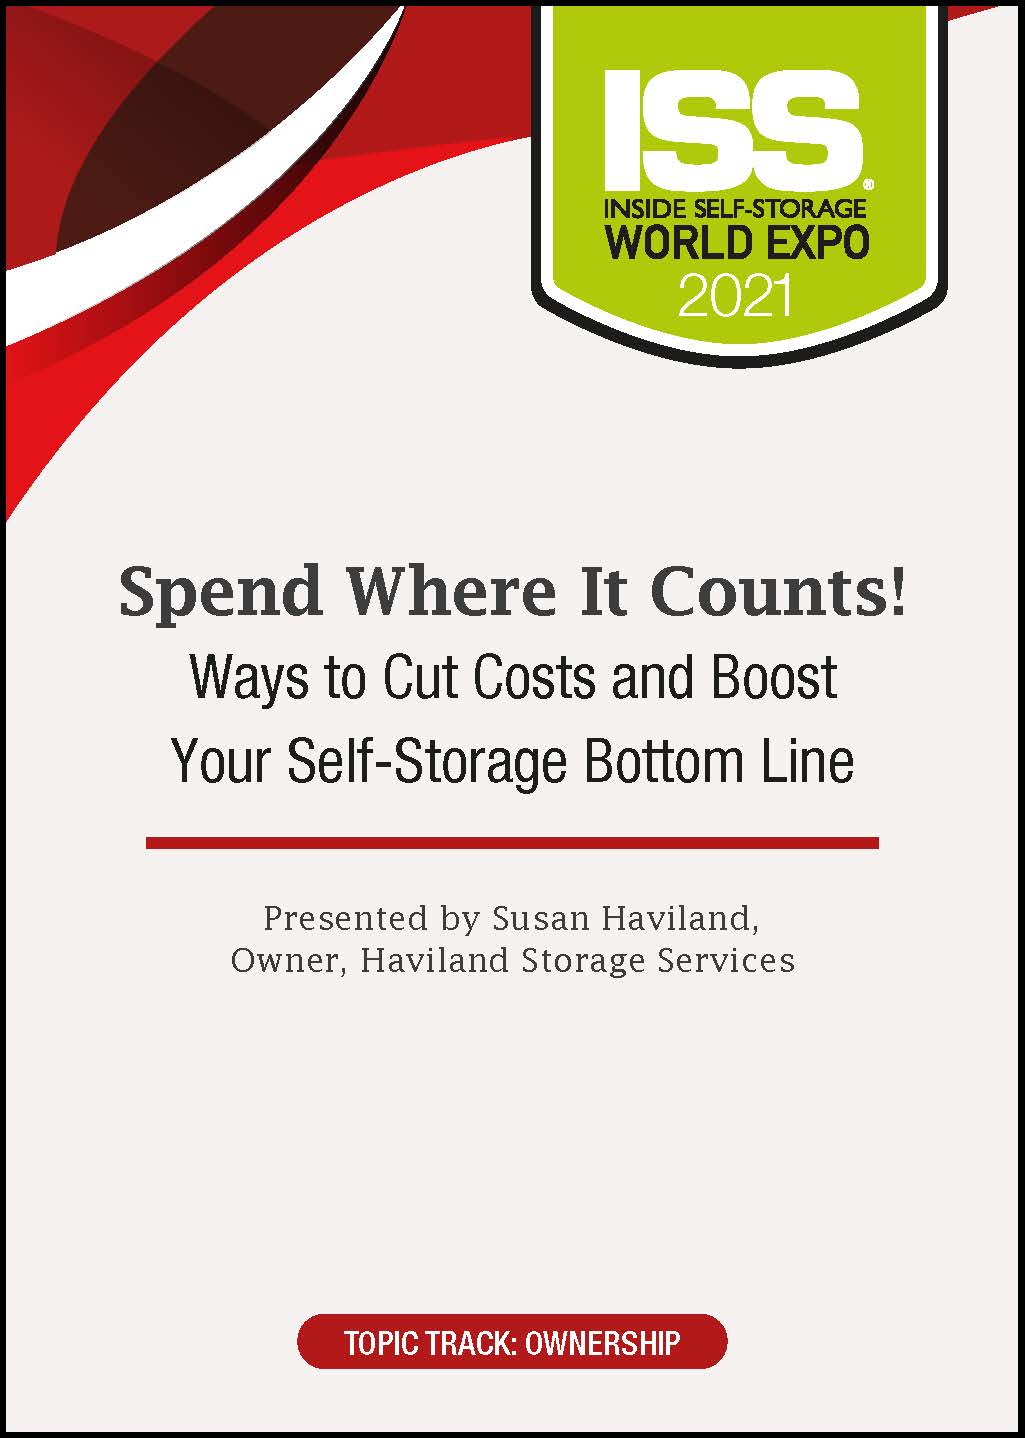 Spend Where It Counts! Ways to Cut Costs and Boost Your Self-Storage Bottom Line